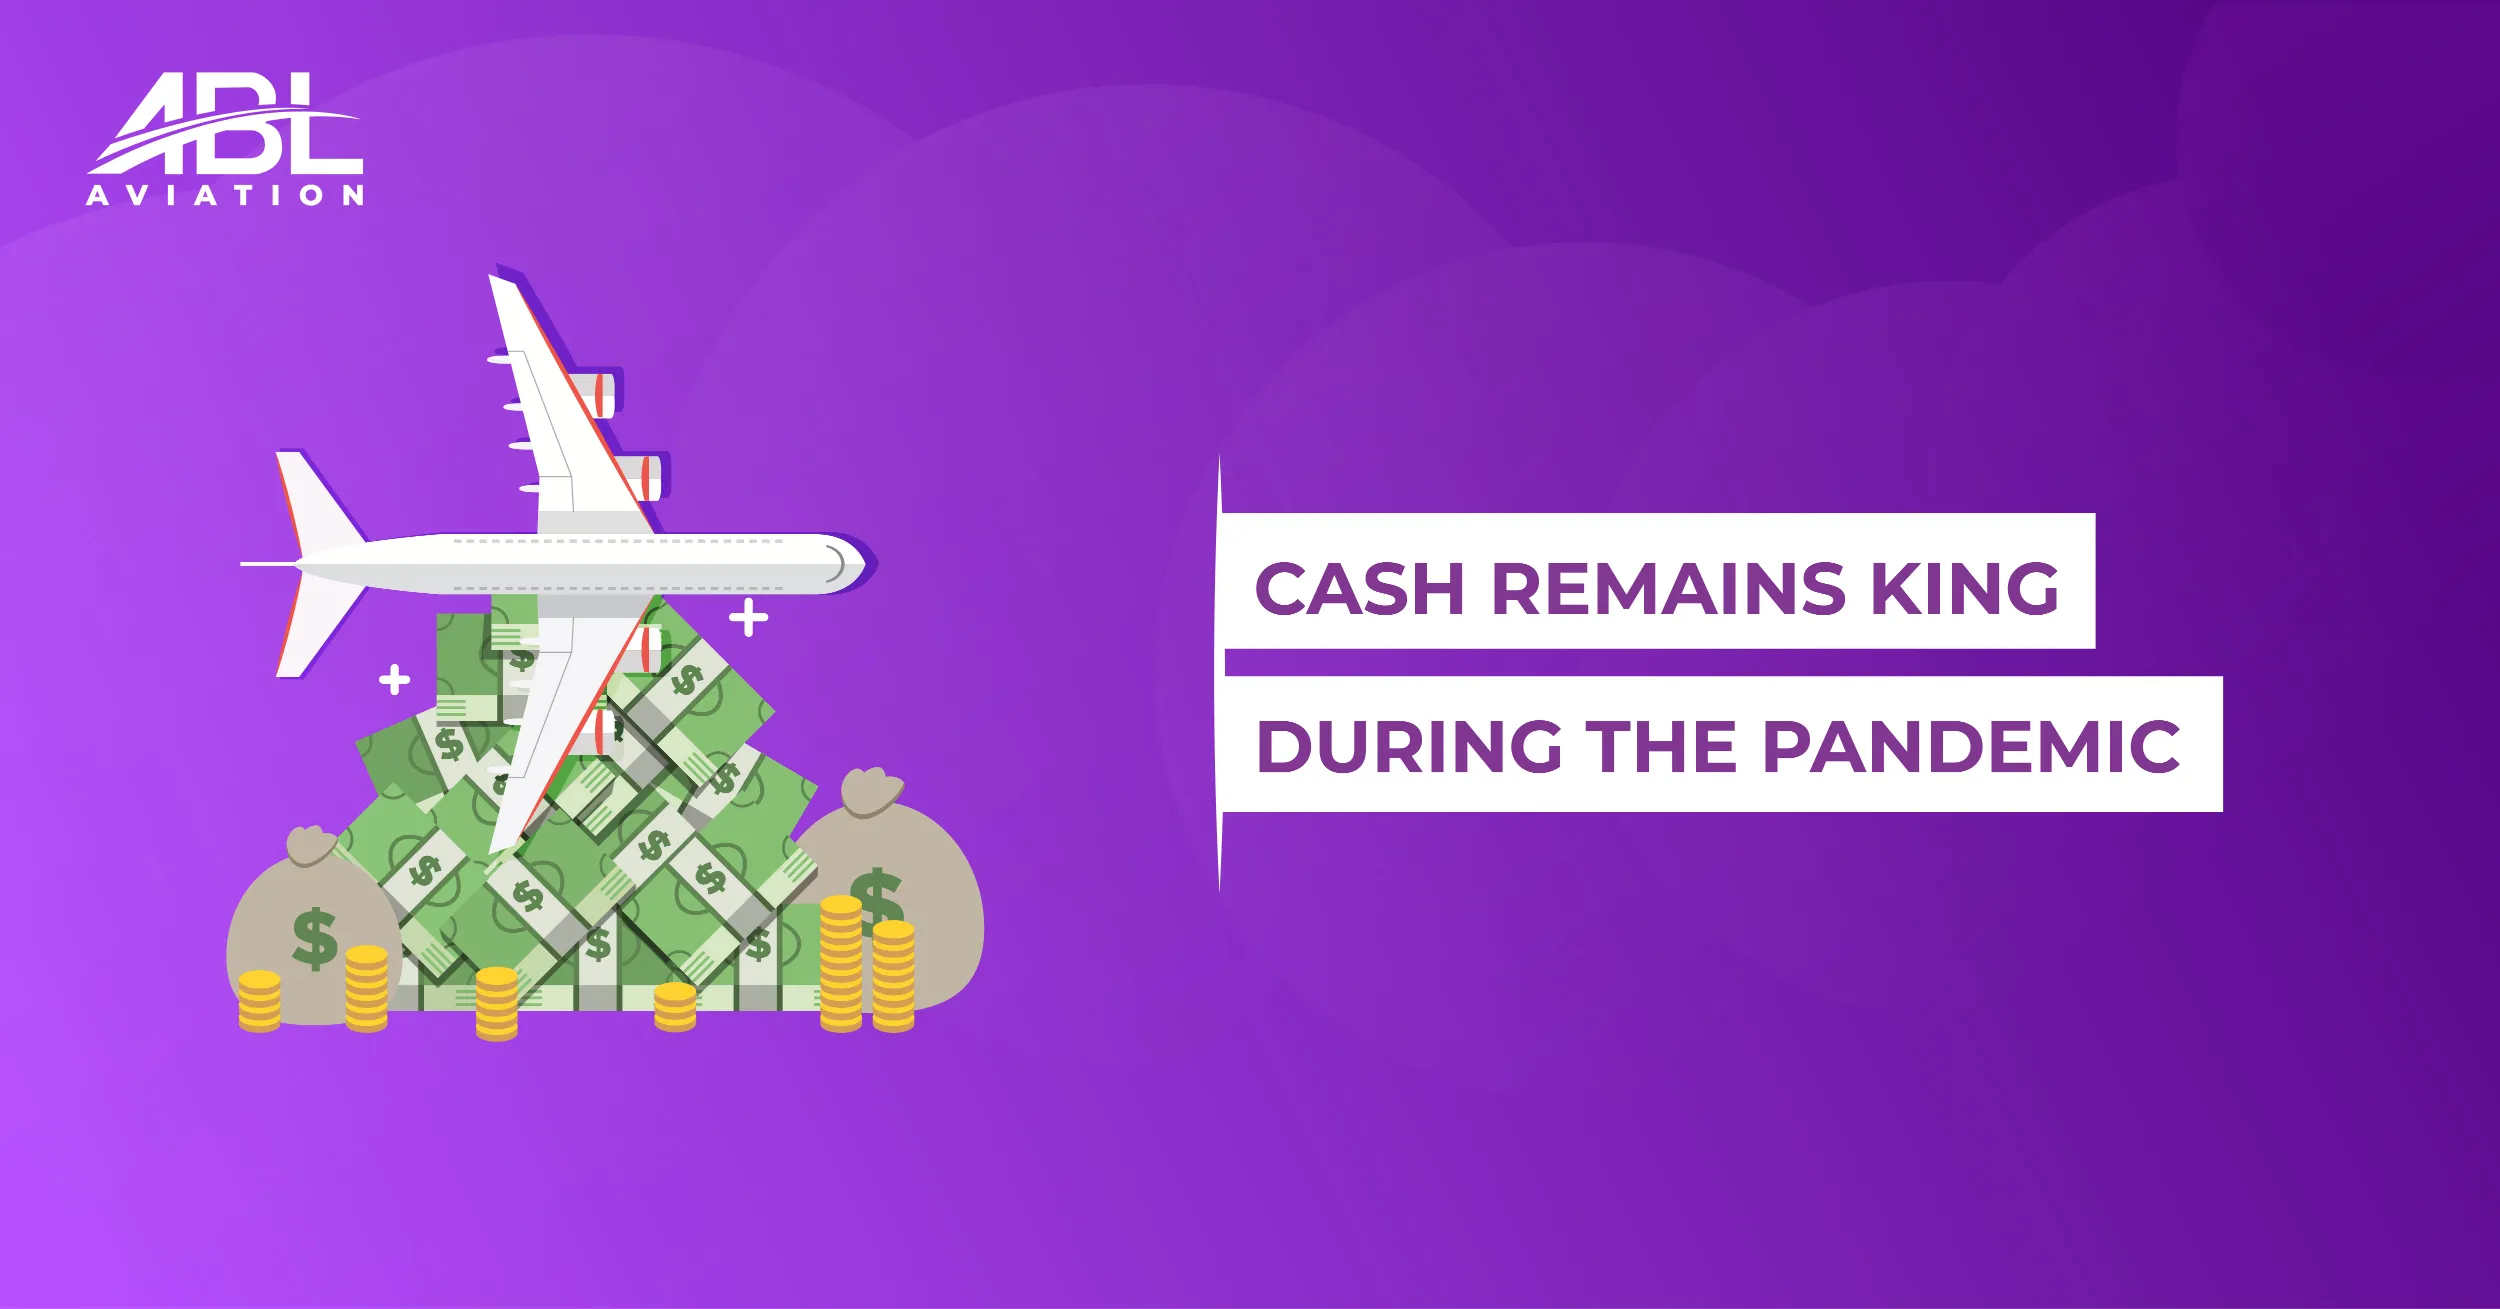 ABL Aviation Releases the May 2021 Insights Report – “Cash Remains King During the Pandemic”